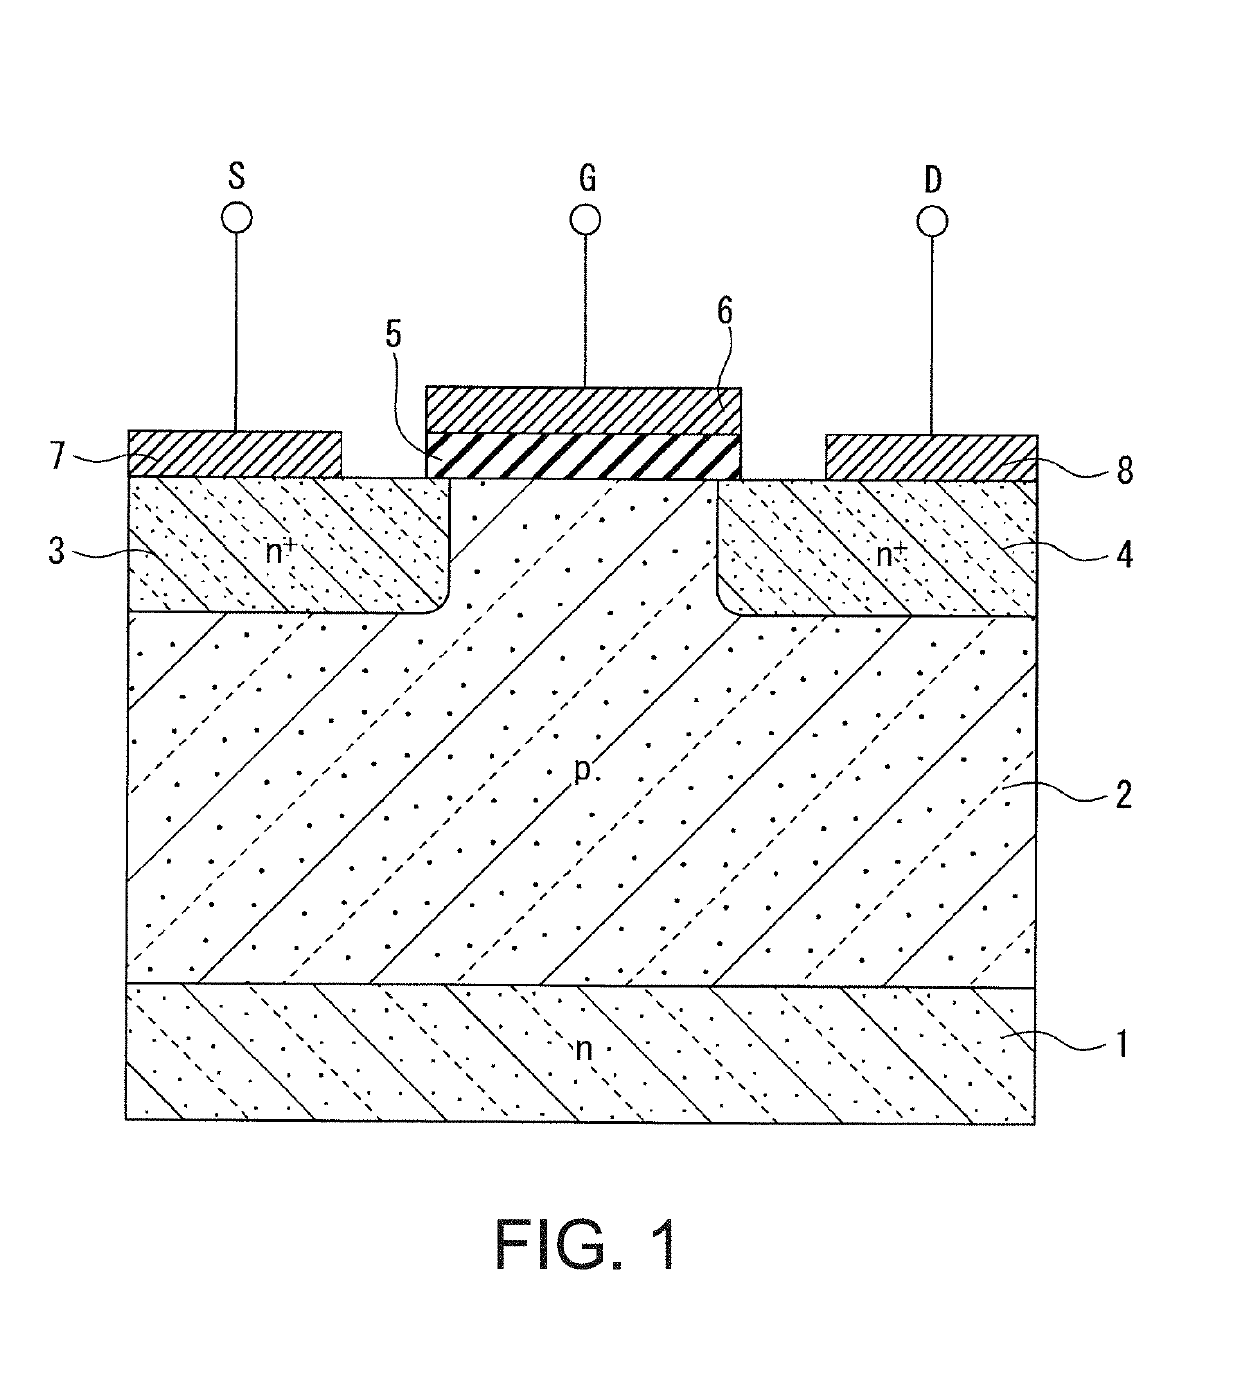 Method of evaluating insulated-gate semiconductor device